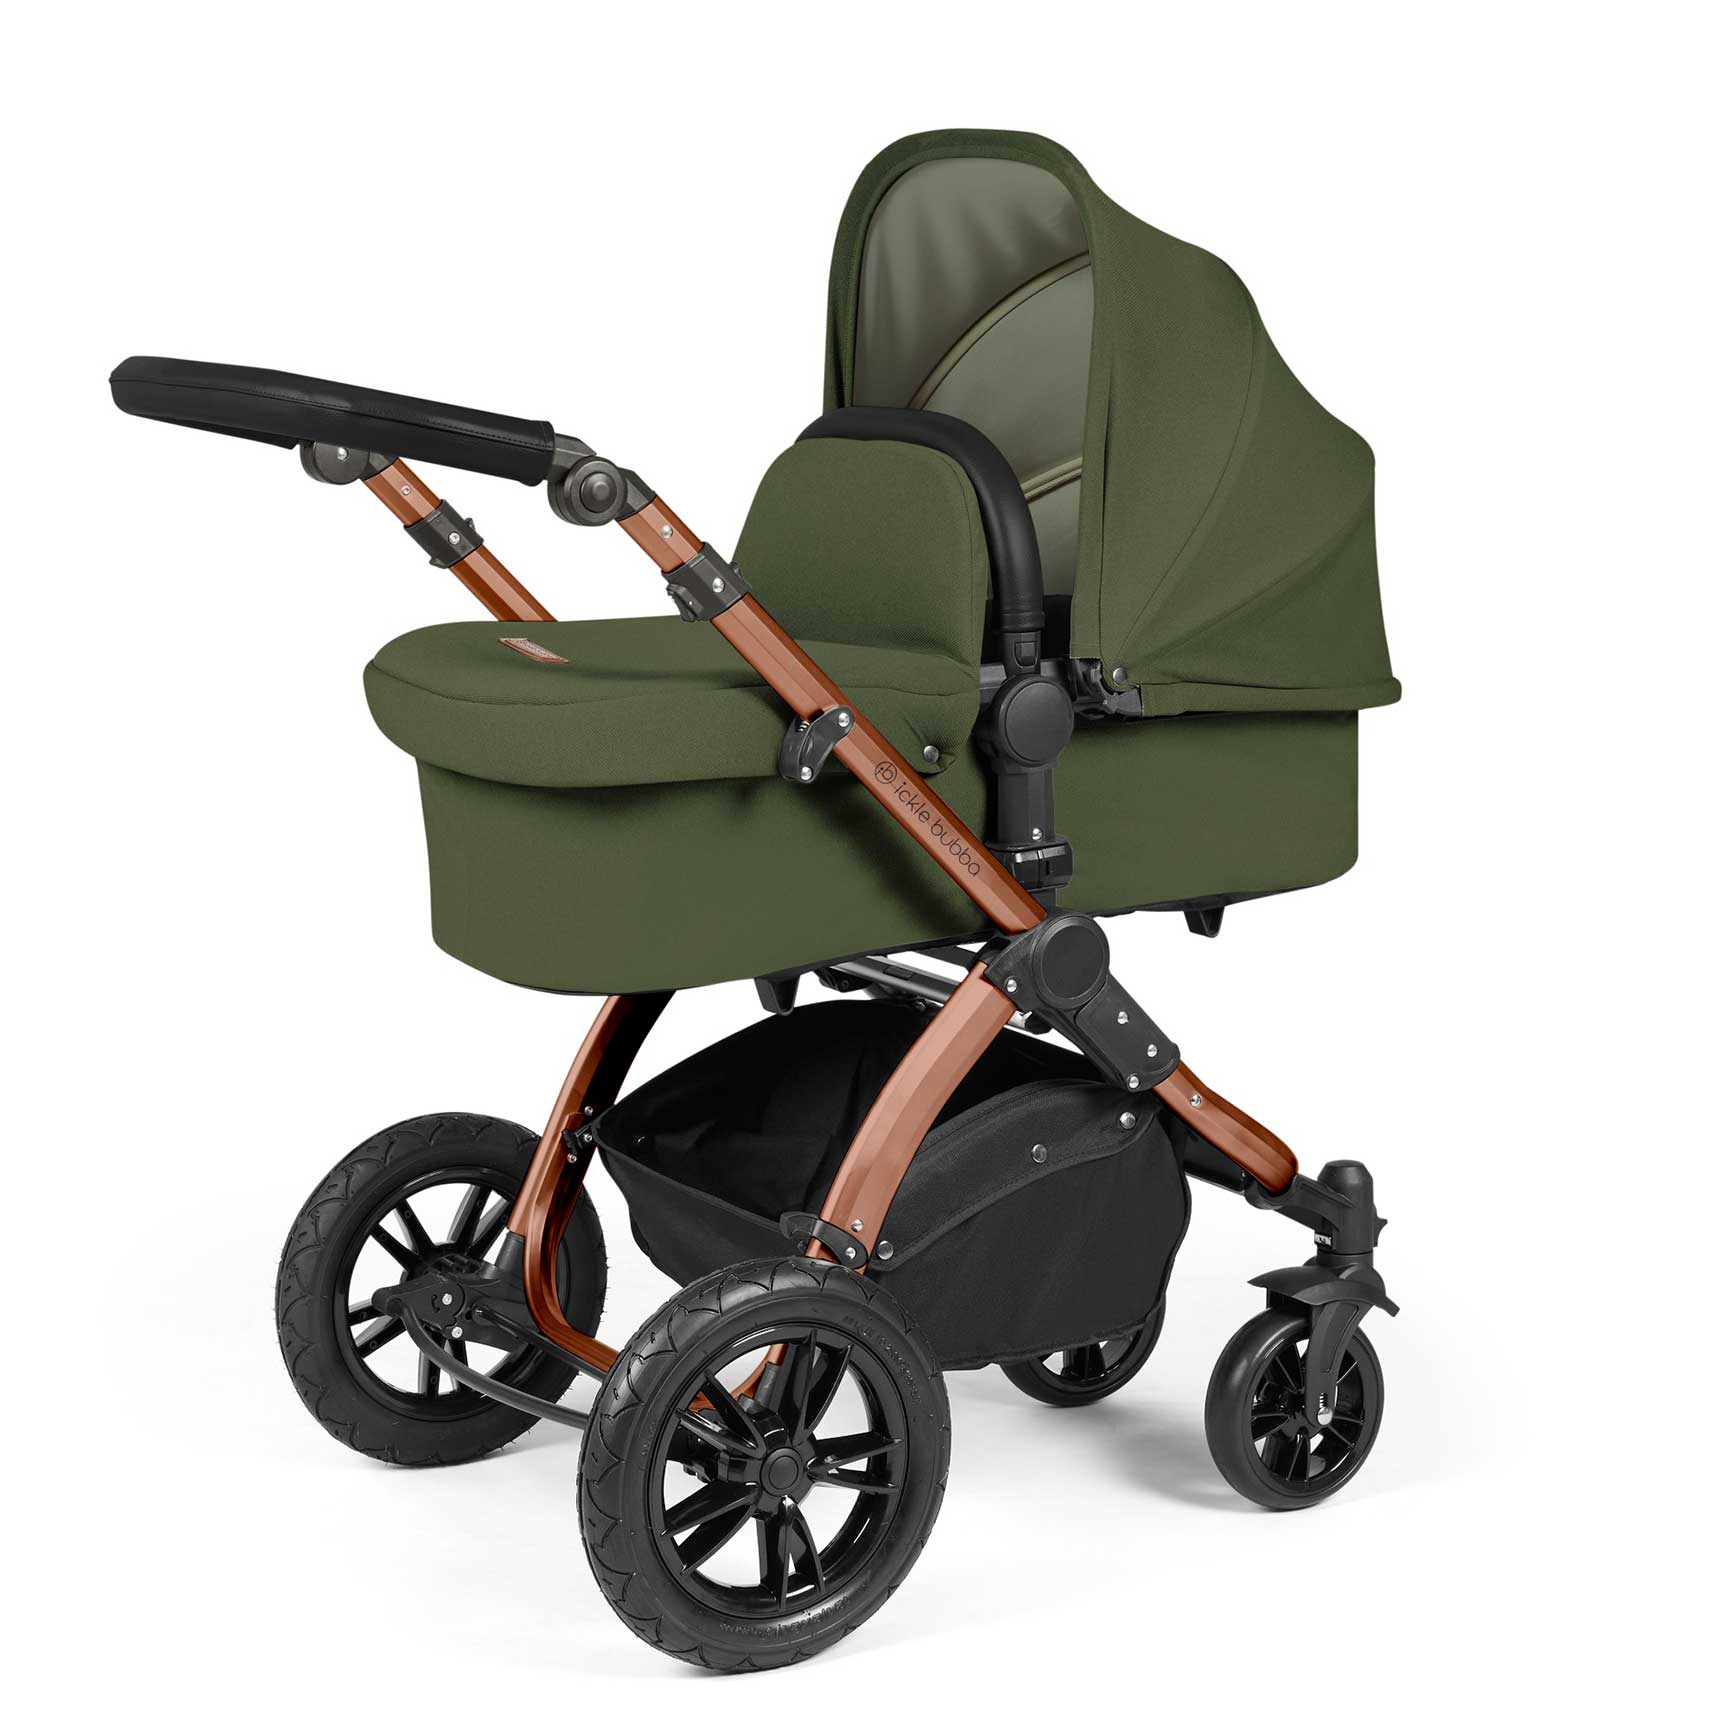 Ickle Bubba travel systems Ickle Bubba Stomp Luxe 2 in 1 Plus Pushchair & Carrycot - Bronze/Woodland/Black 10-003-001-140